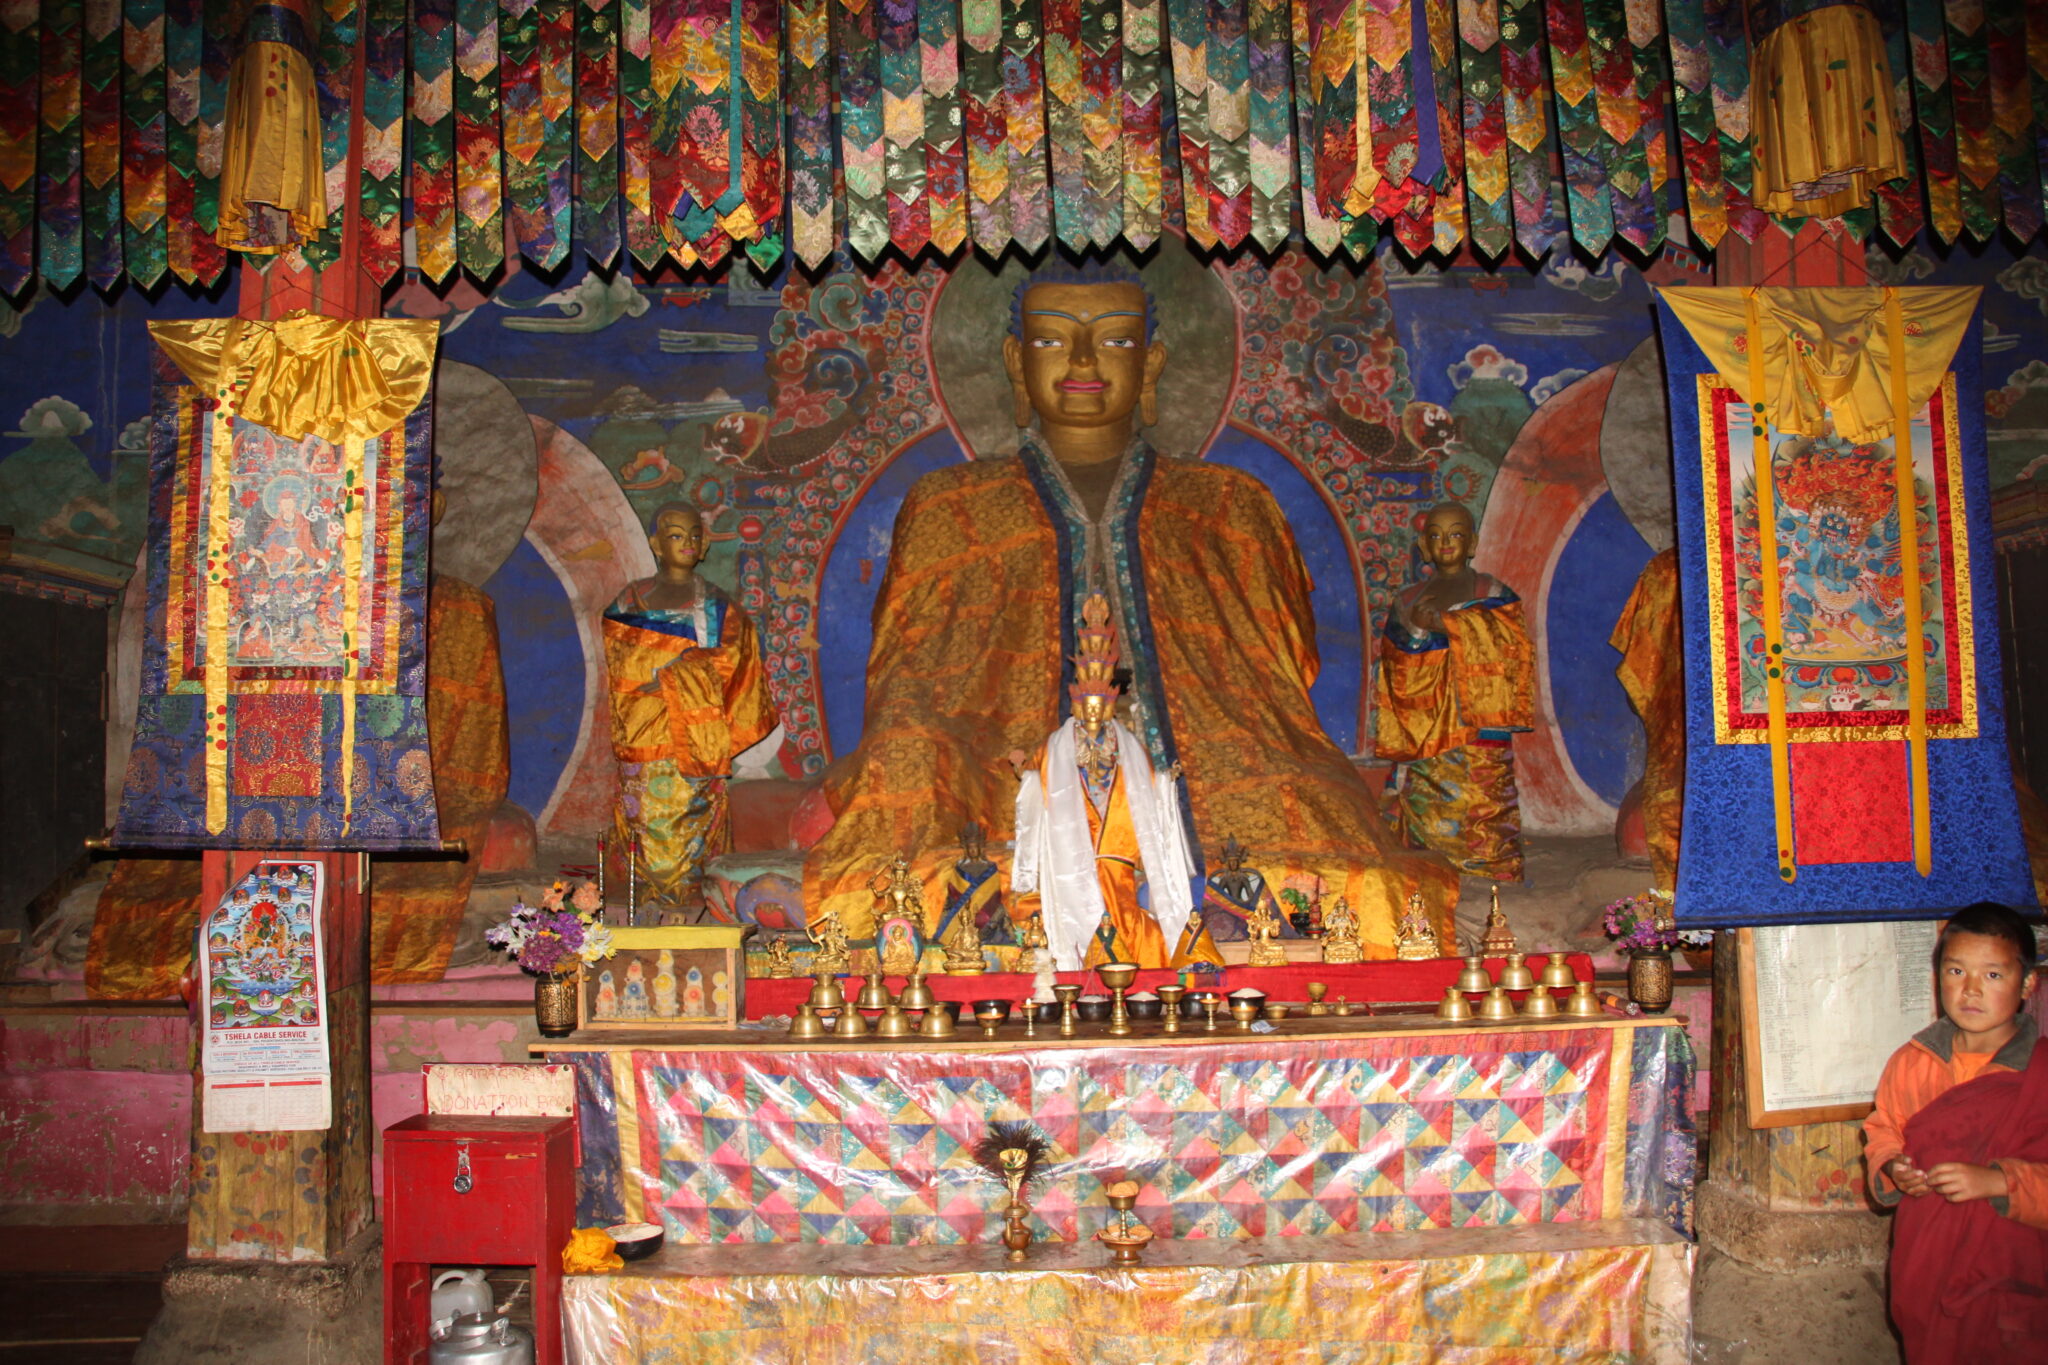 Buddha wearing saffron robe seated in niche underneath colorful banners and between two thangkas (paintings on cloth with embroidered textile borders)